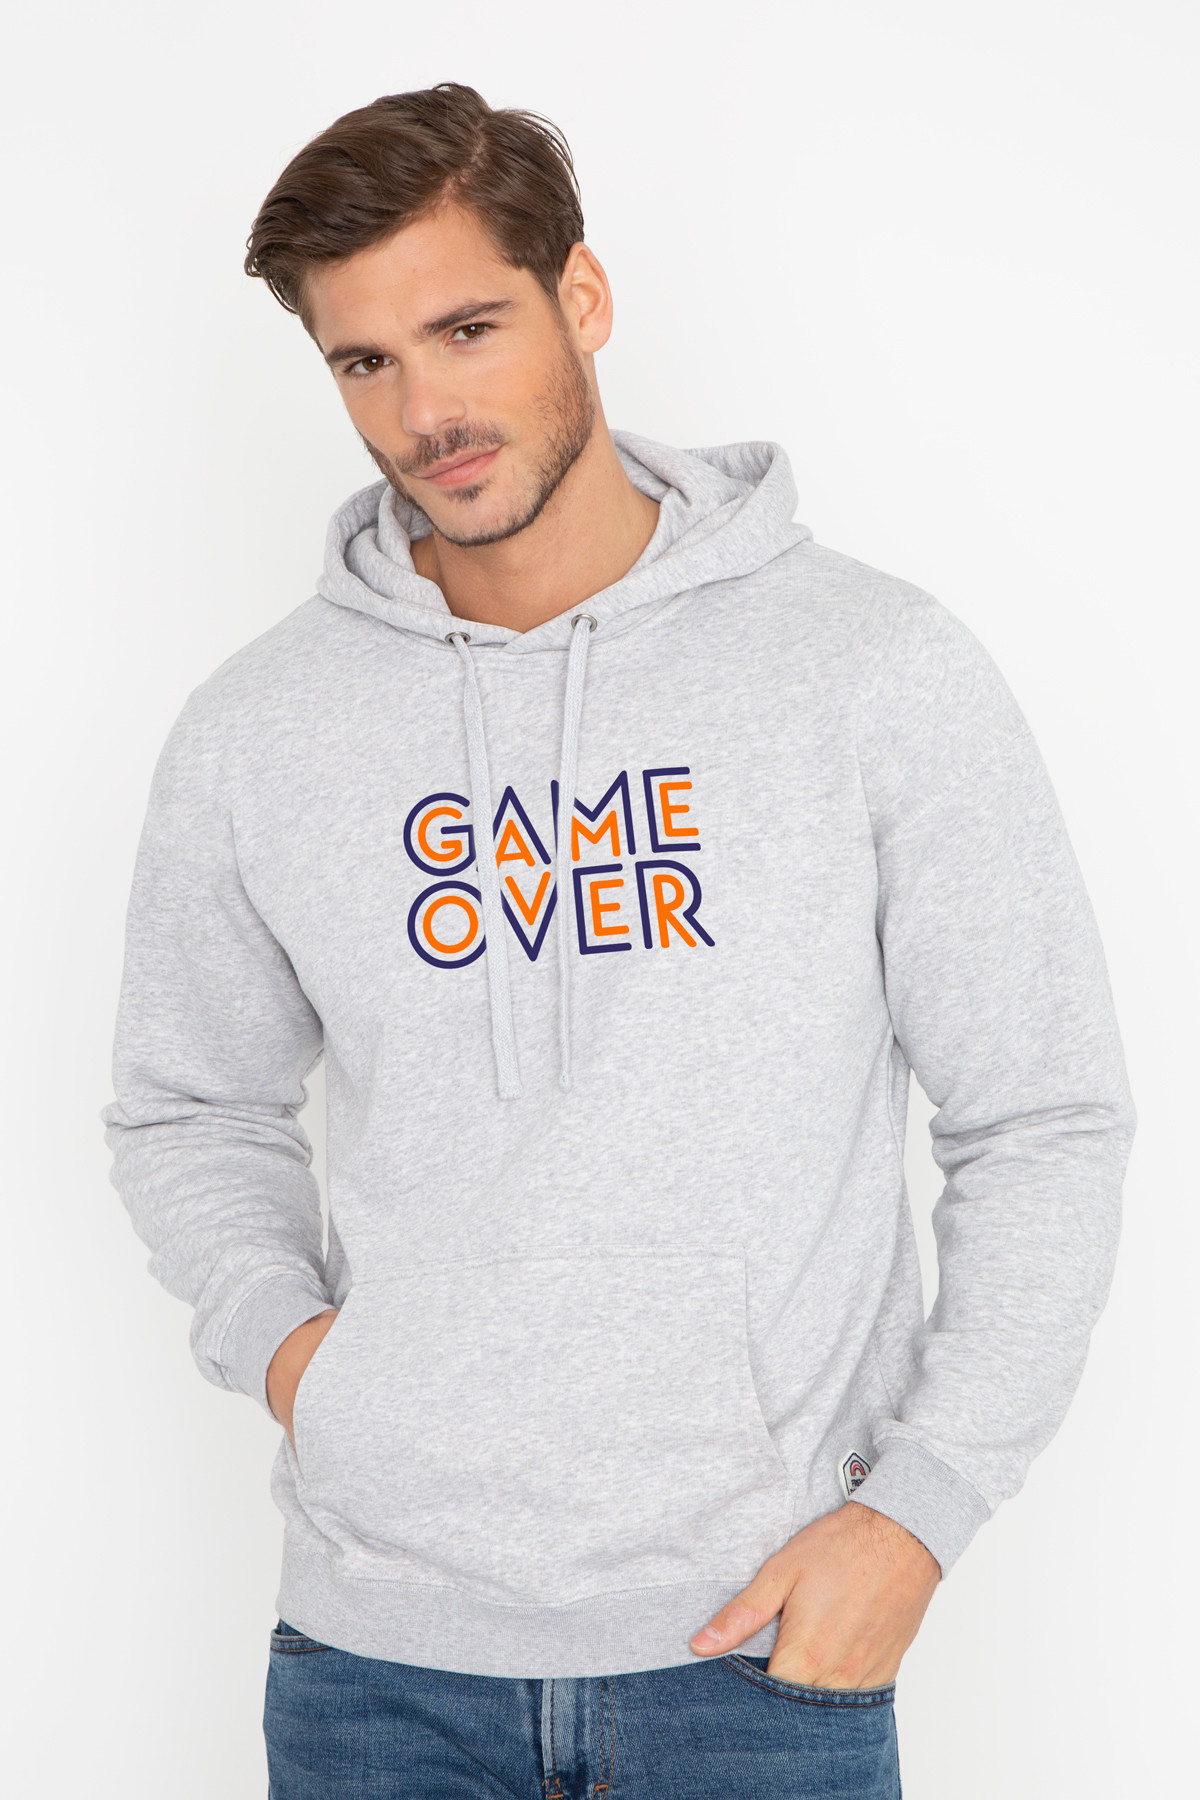 Photo de SWEATS À CAPUCHE Hoodie GAME OVER chez French Disorder